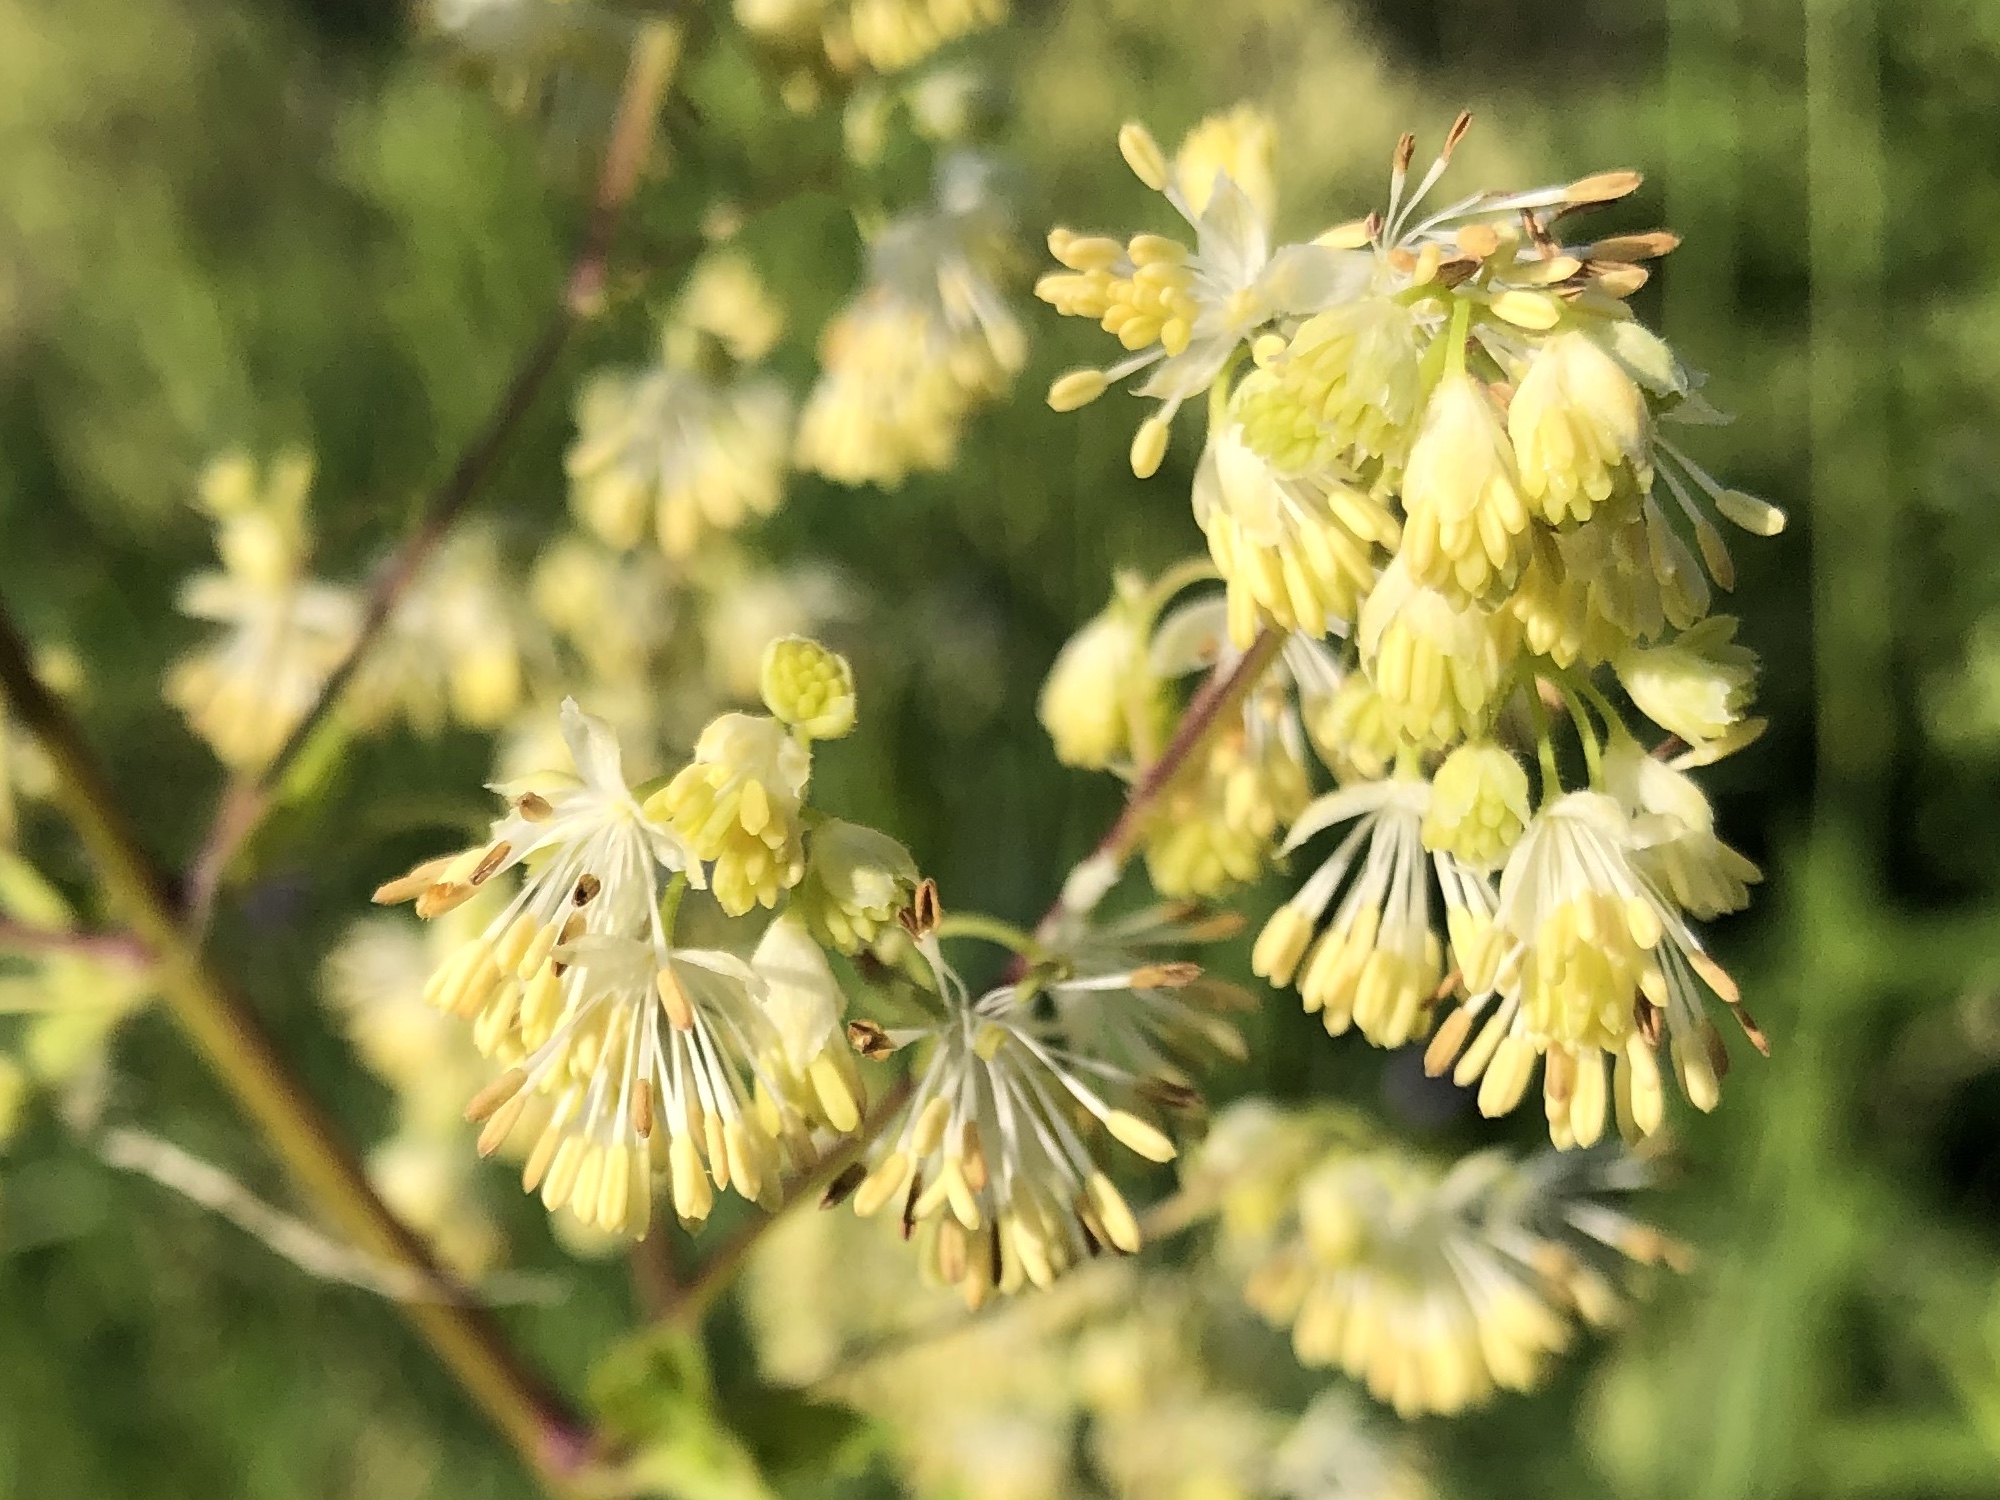 Tall Meadow-rue male flowers on shore of Marion Dunn Pond on June 16, 2020.